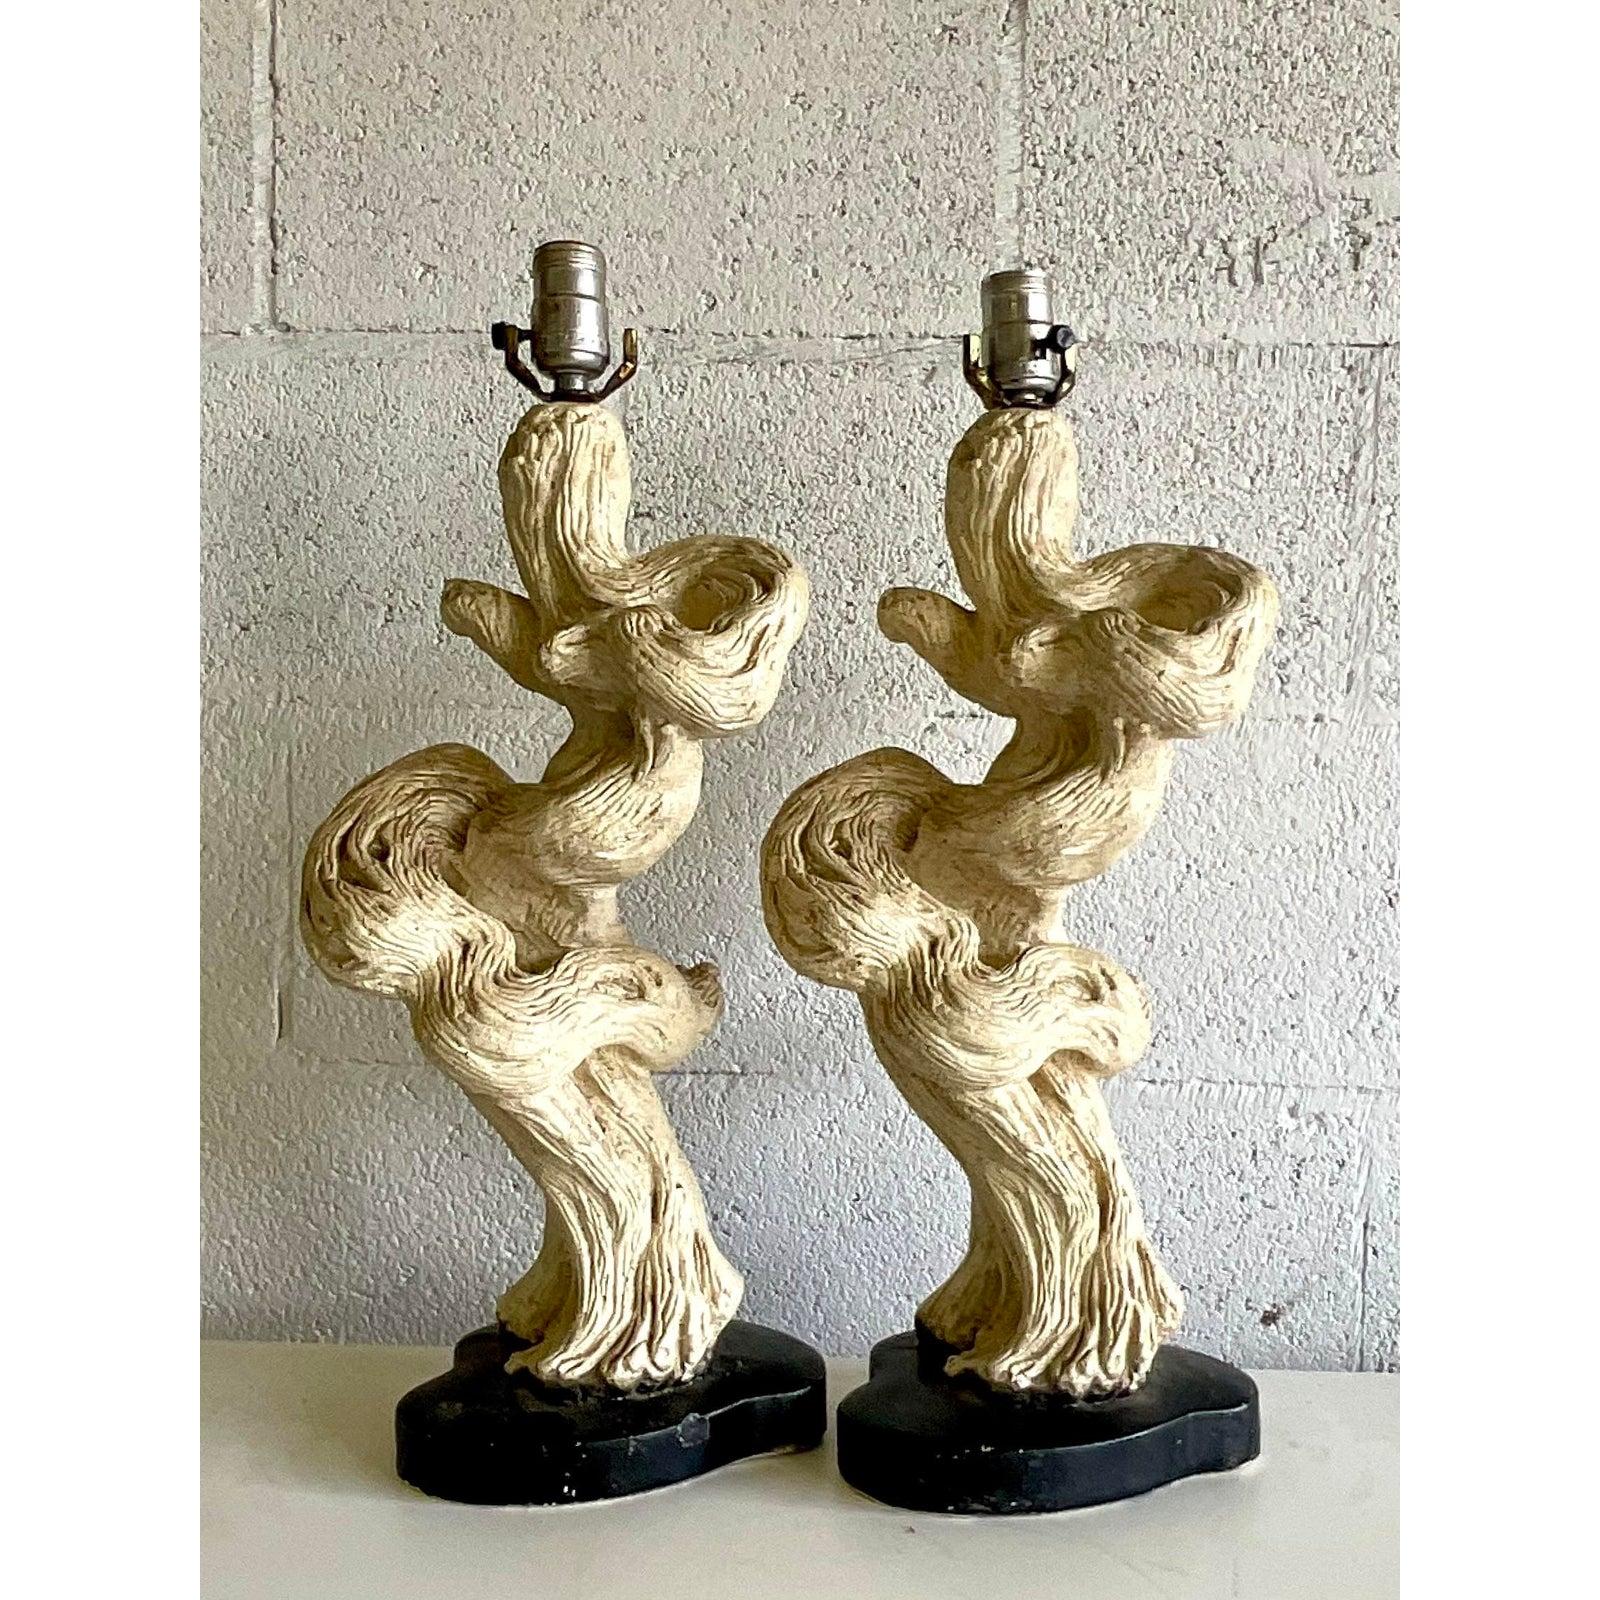 A fantastic pair of MCM table lamps. A chic period design of driftwood in a glazed ceramic. Acquired from a Palm Beach estate.